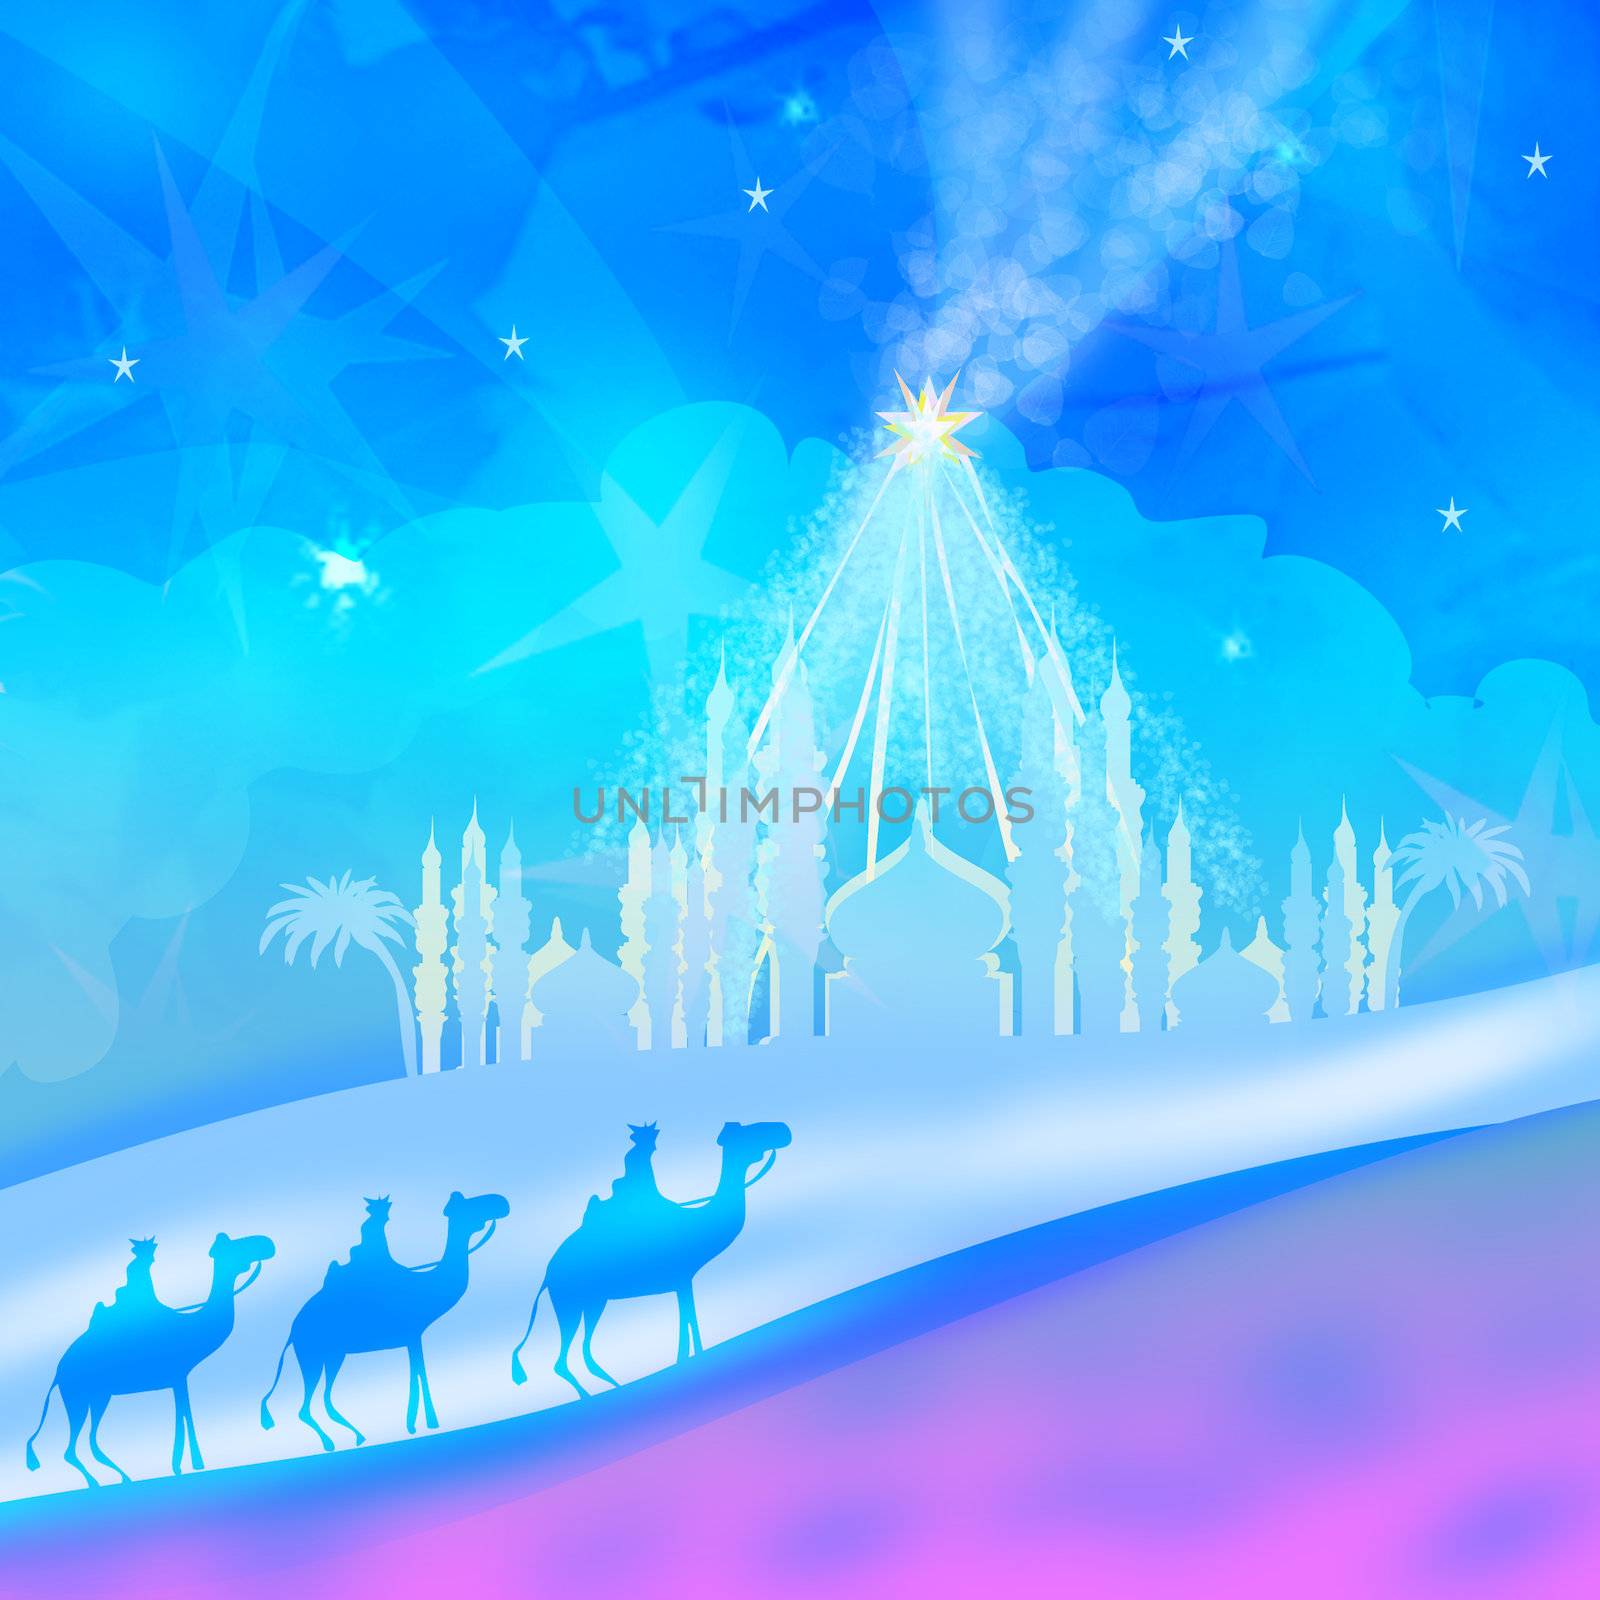 Classic three wise men scene and shining star of Bethlehem by JackyBrown